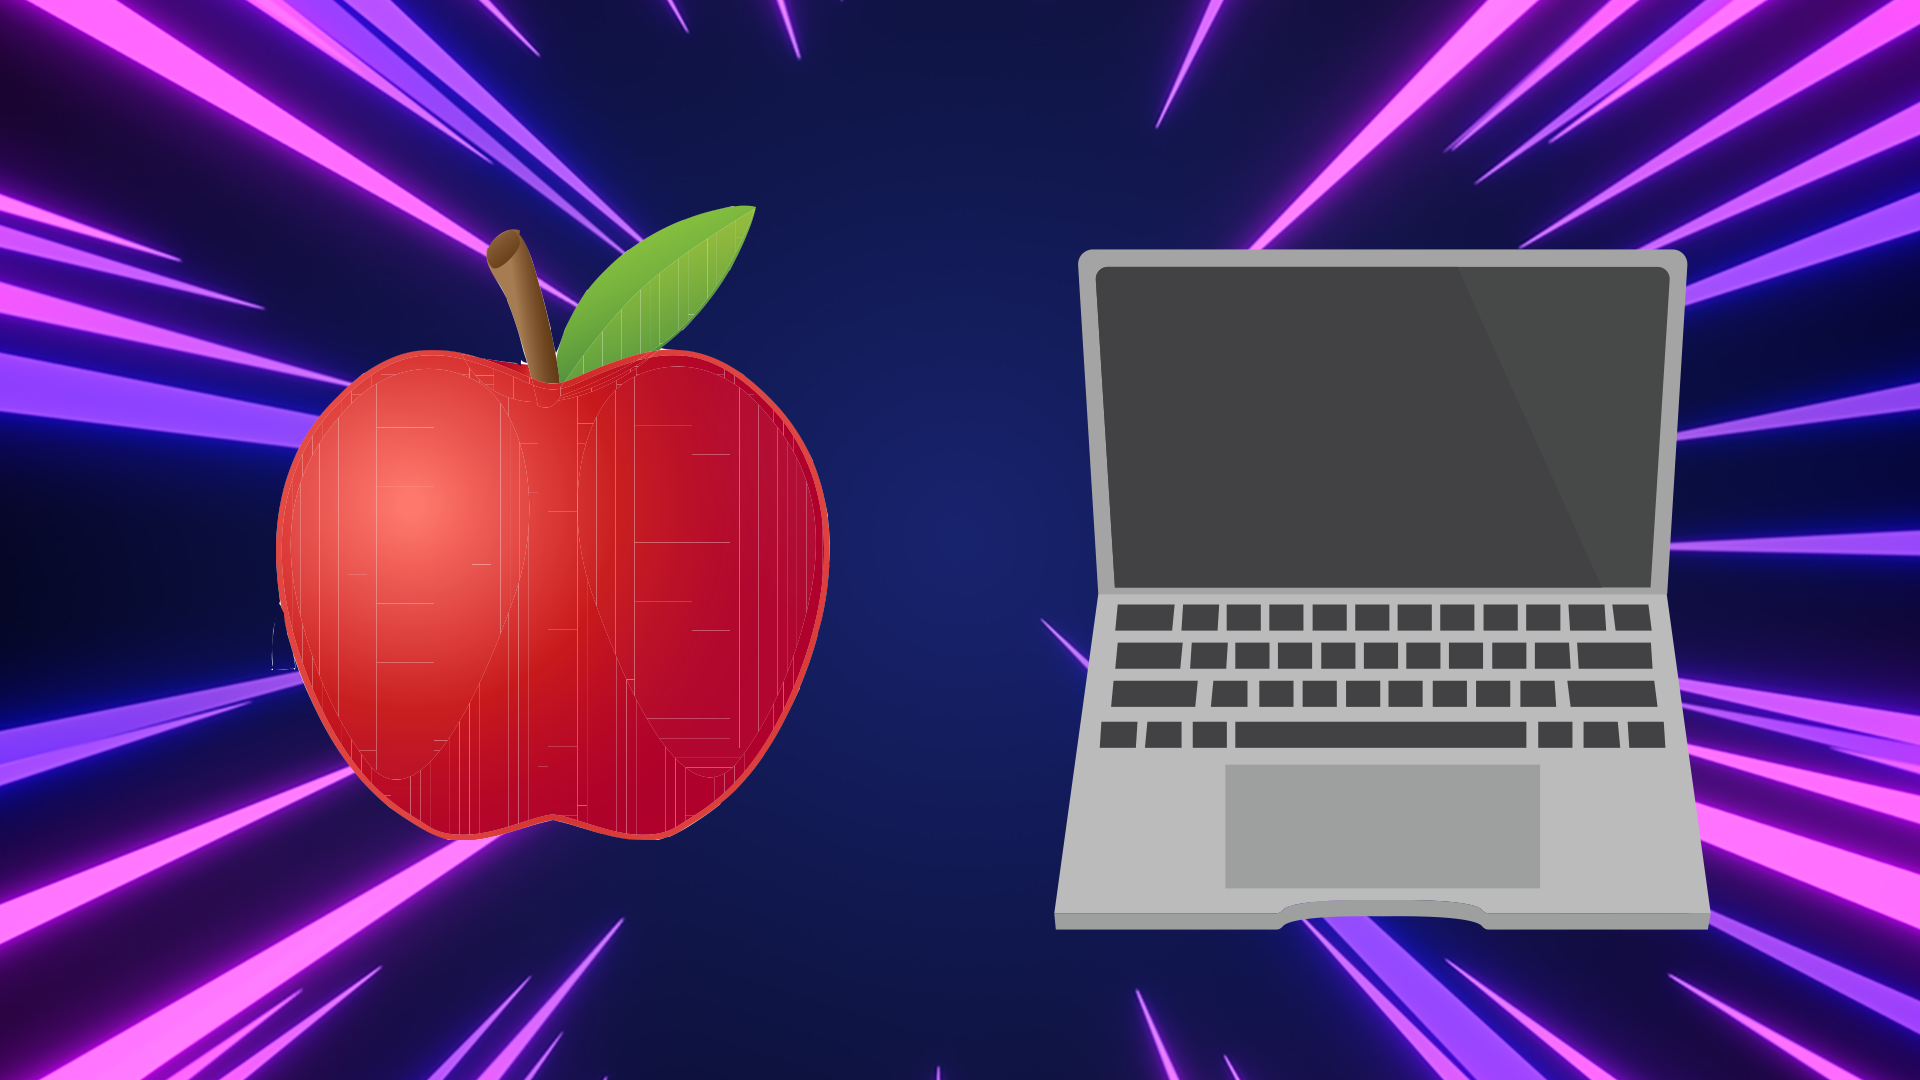 An apple and a laptop emoji